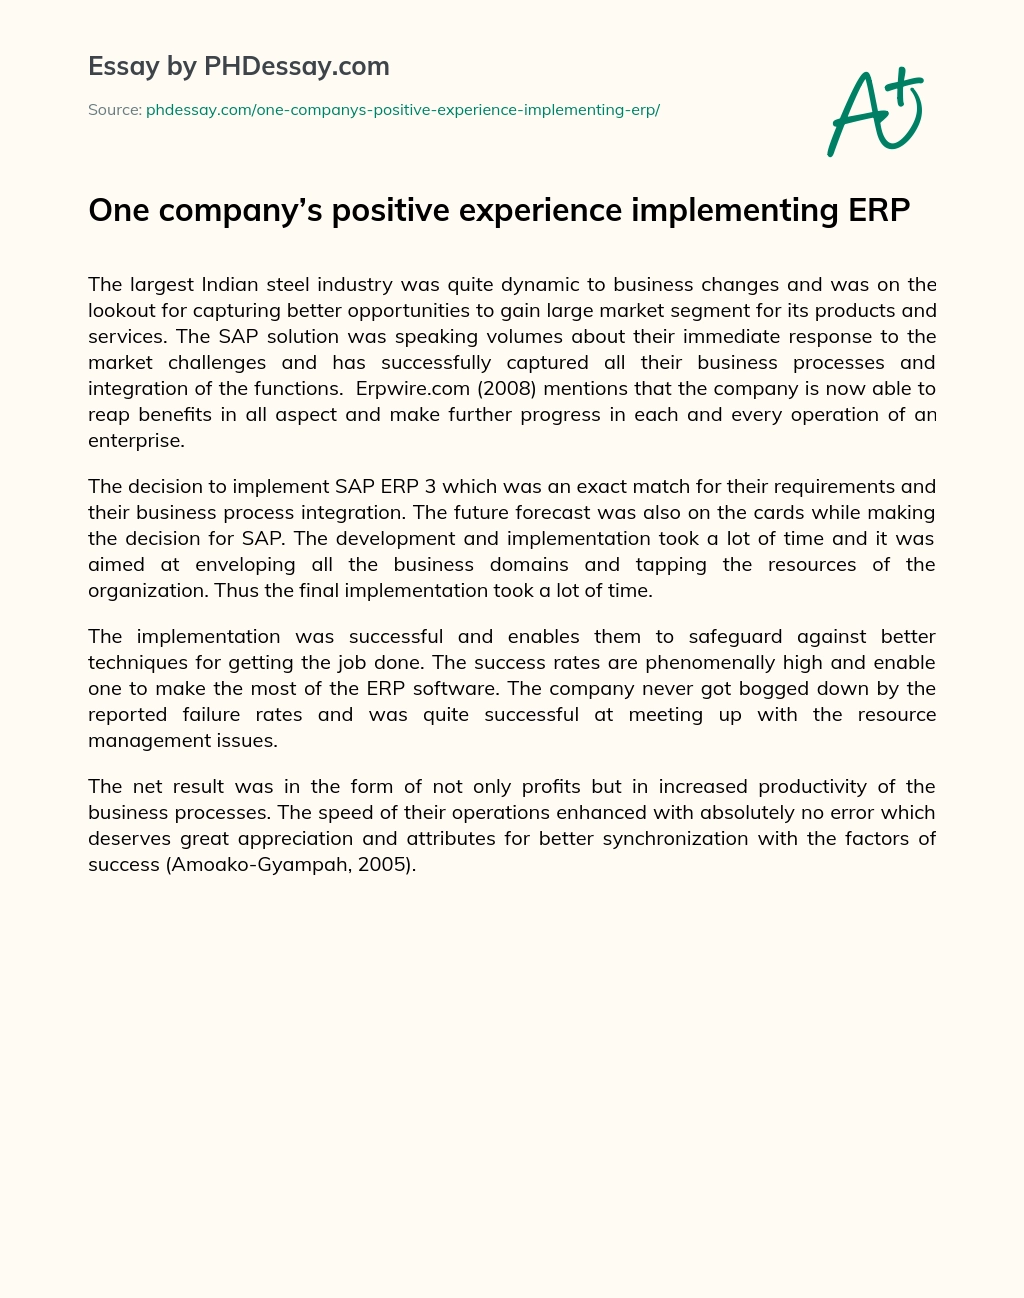 One company’s positive experience implementing ERP essay